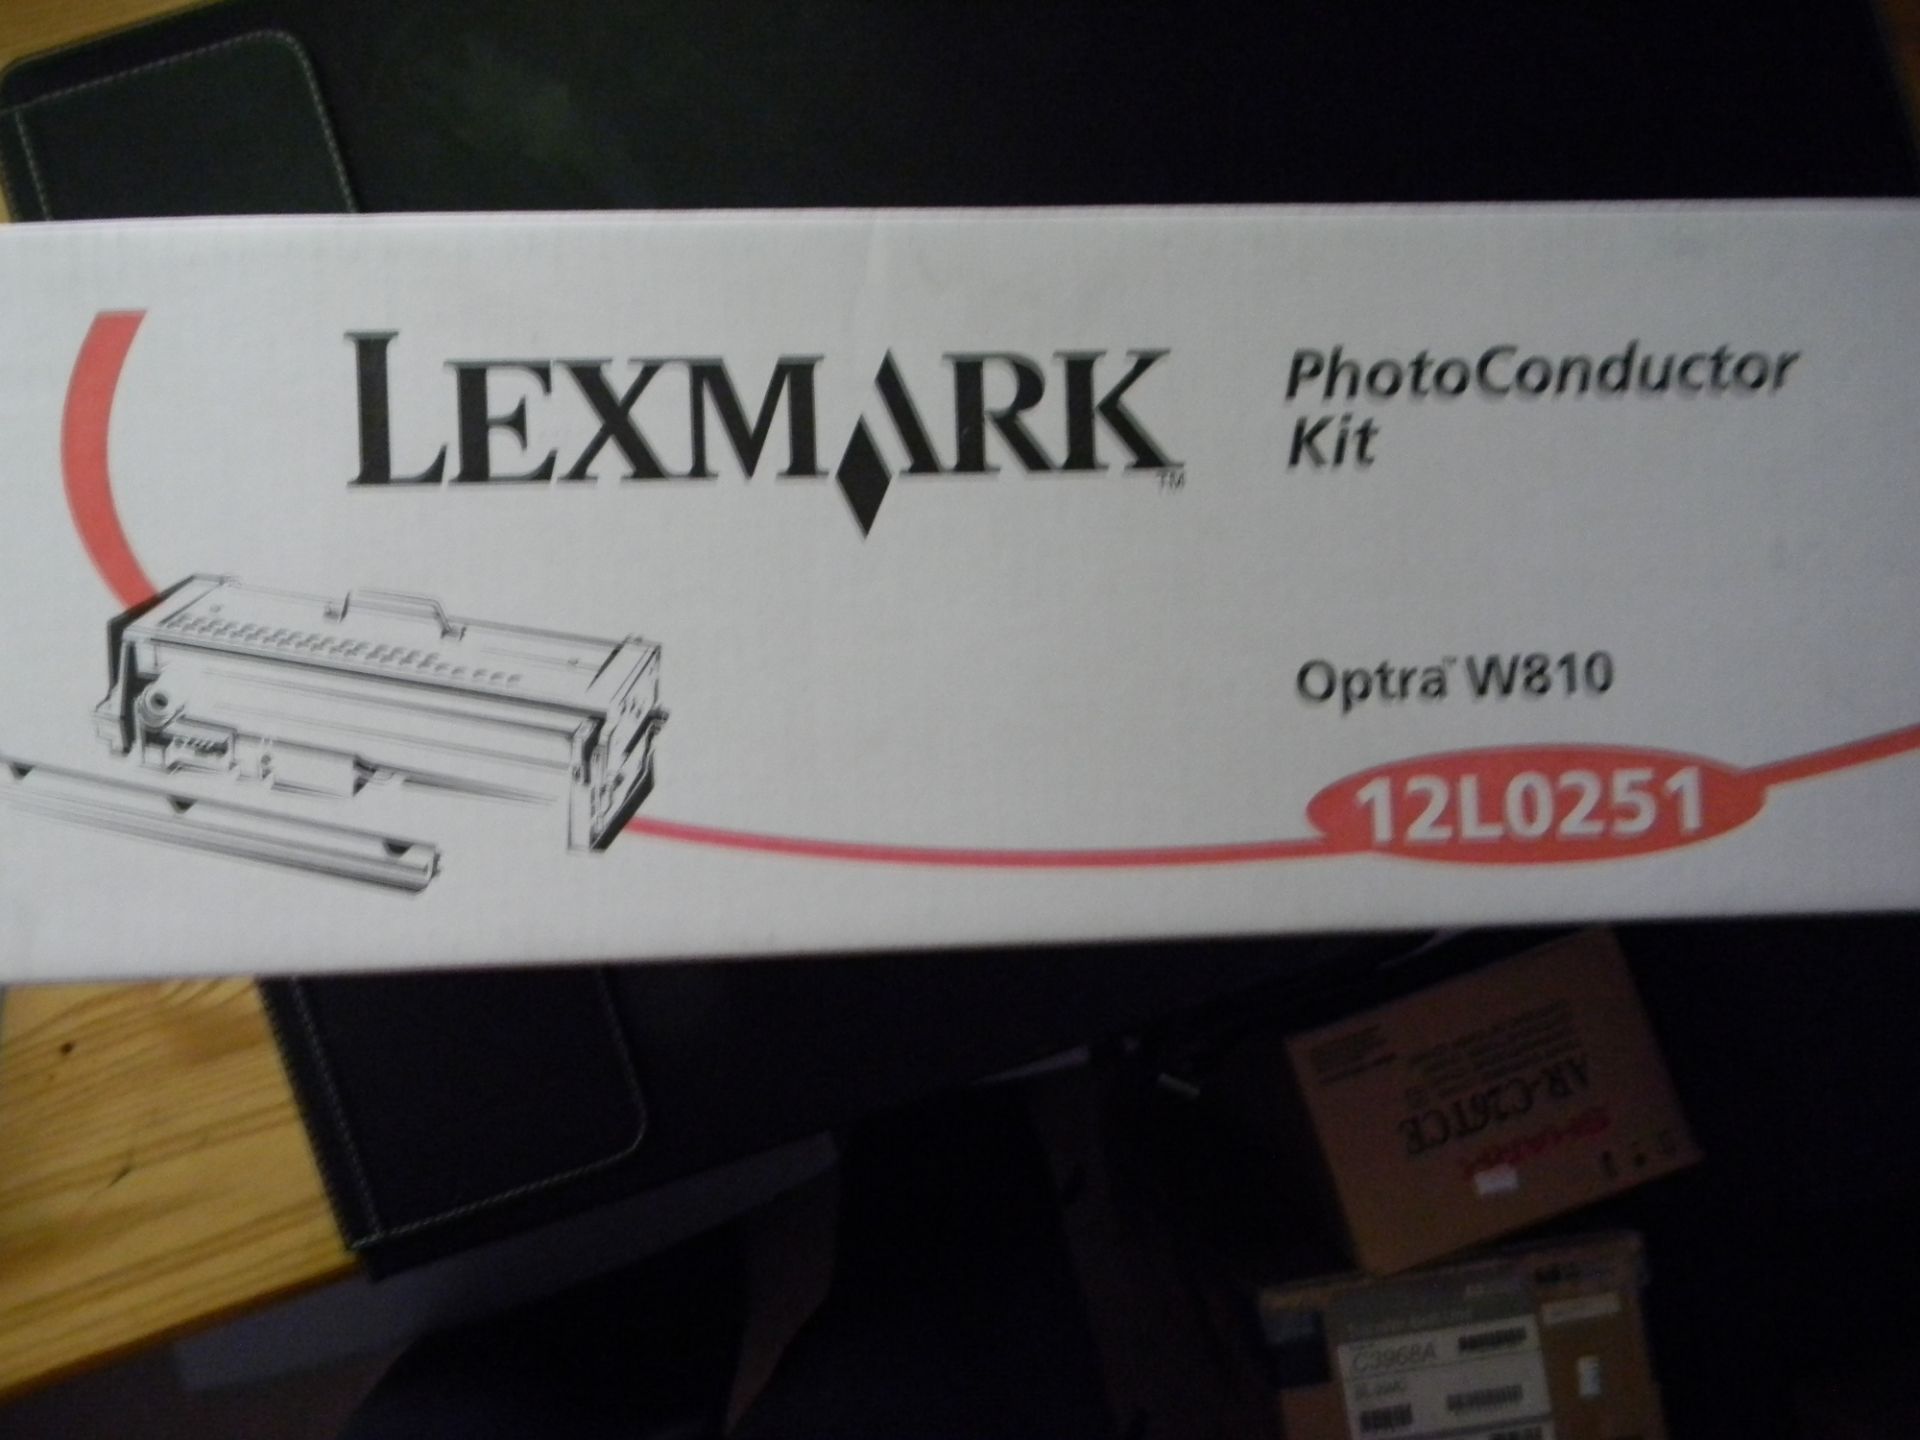 Lexmark PhotoConductor Kit Optra W810 12L0251 - Image 2 of 2